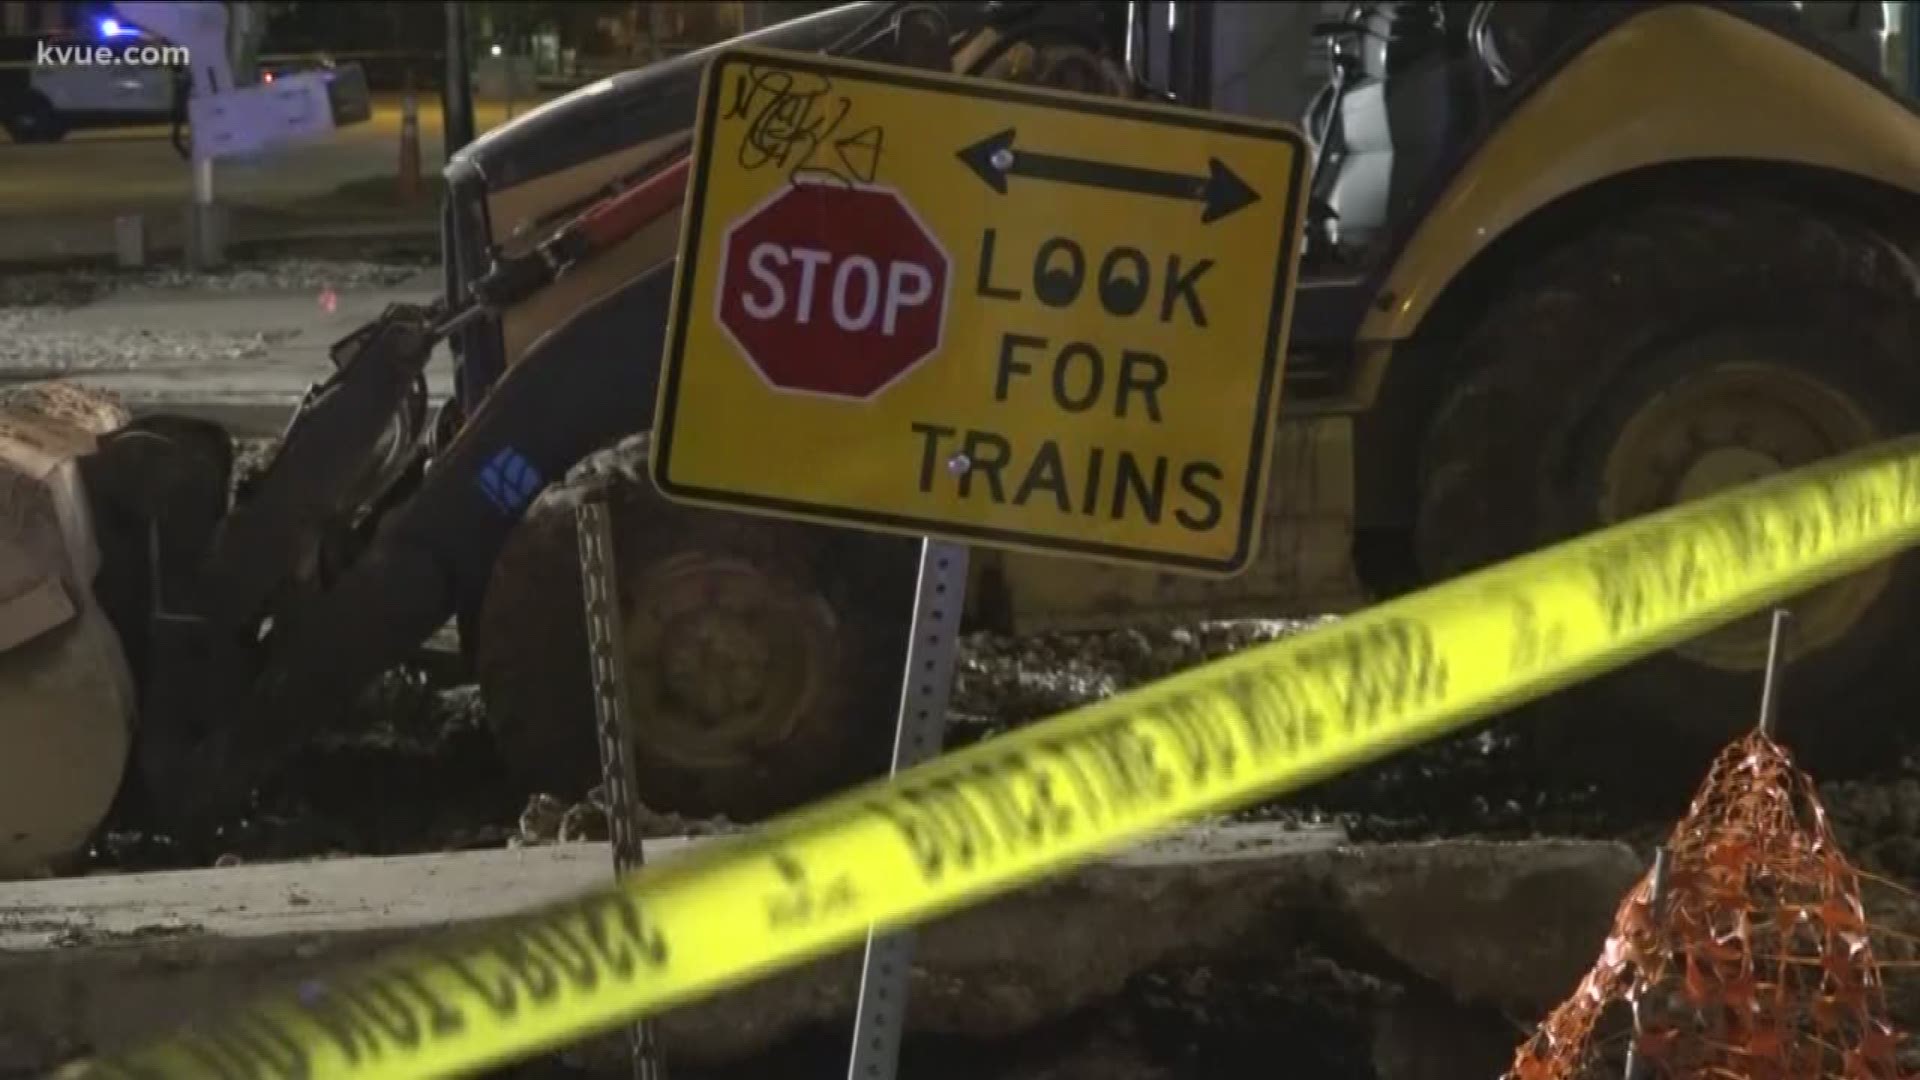 Crews are working throughout the night to remove a derailed train in East Austin, just in time for Monday morning's commute.